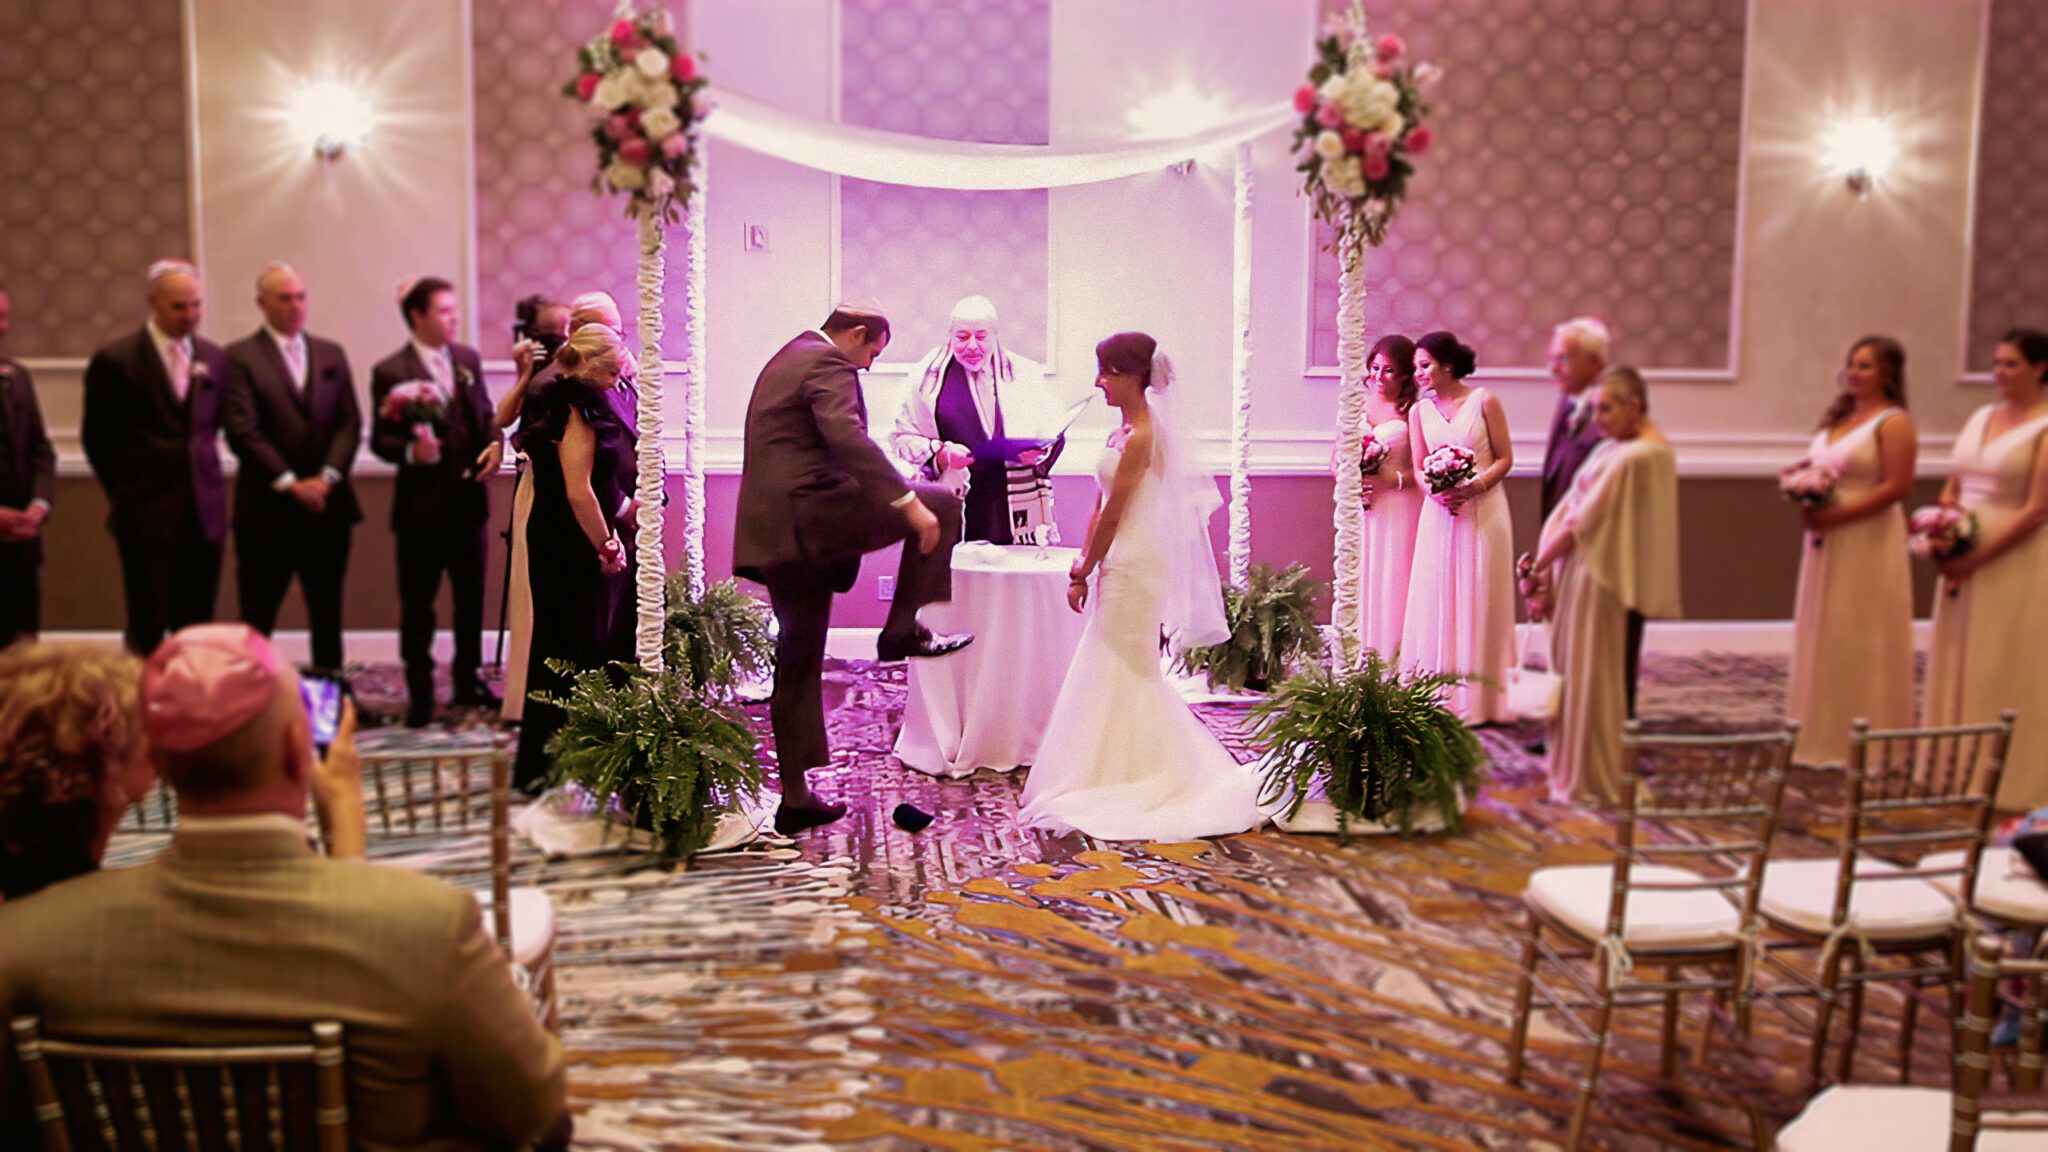 Breaking of the glass in a Kosher Wedding Ceremony